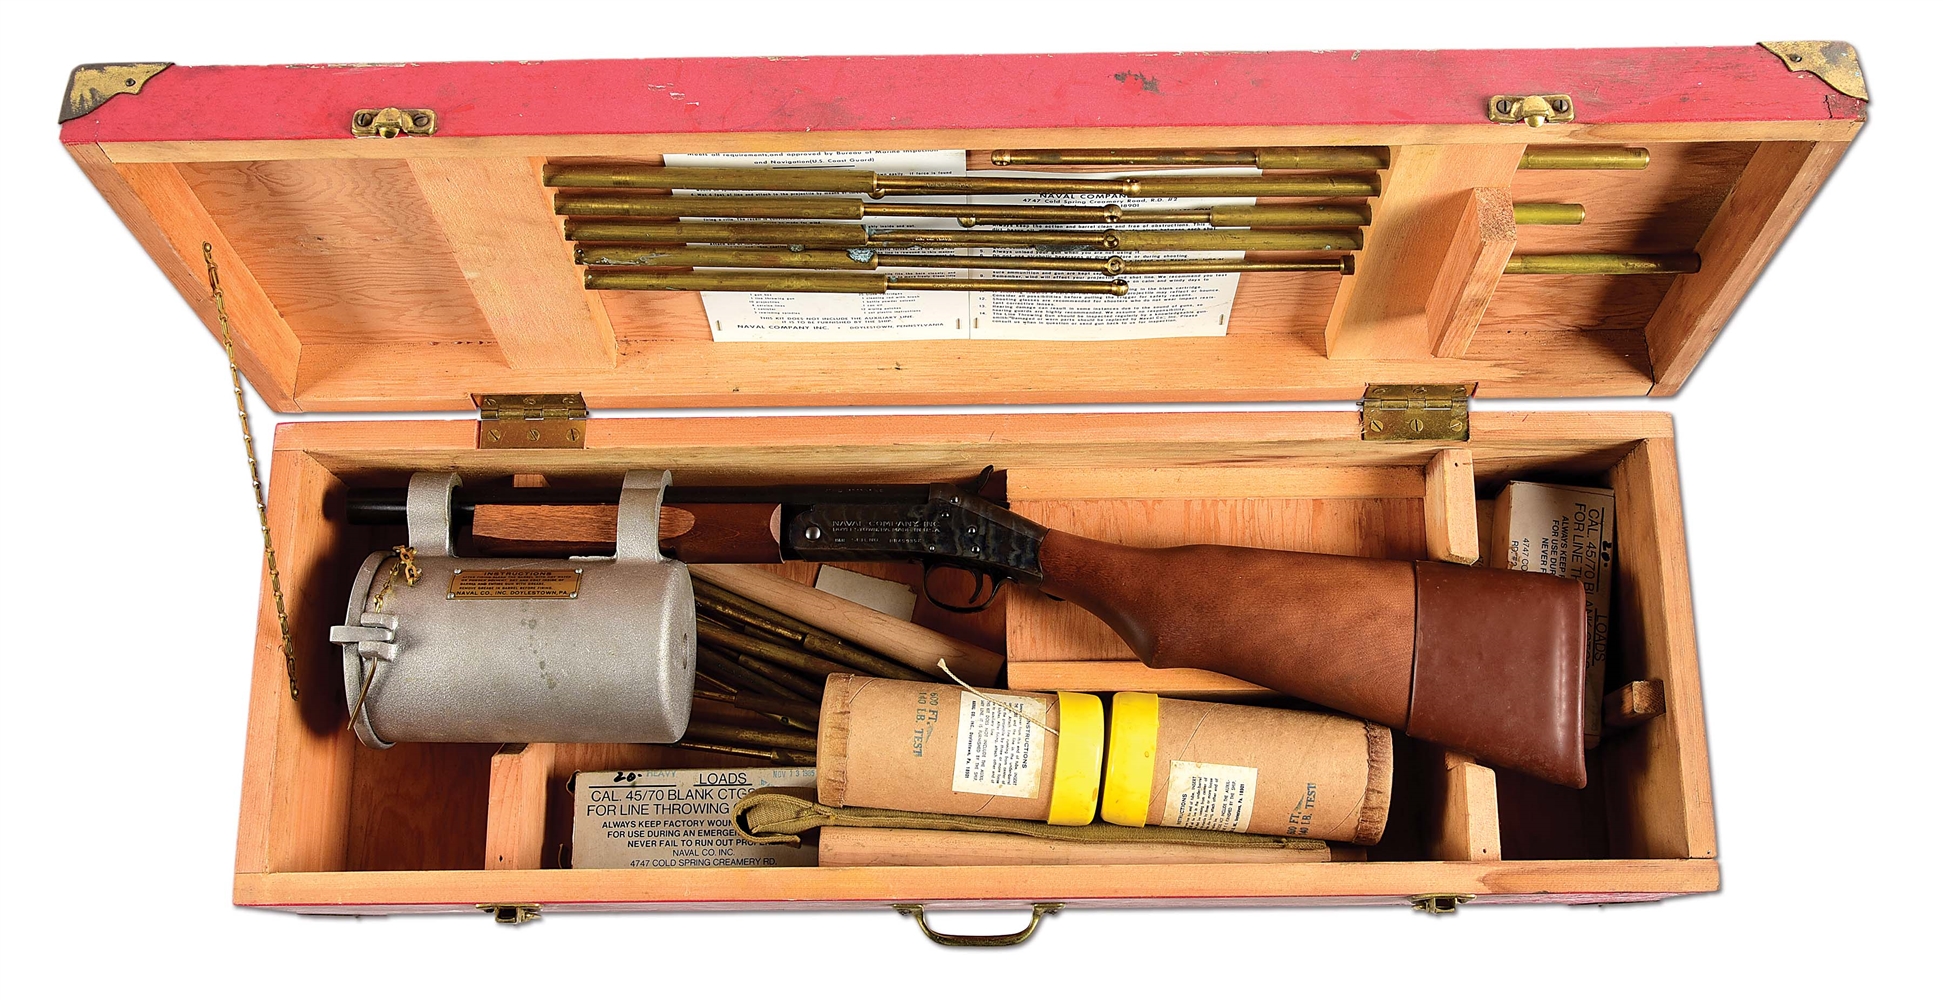 (M) CASED H&R NAVAL COMPANY BRIDGER 85 LINE THROWING GUN WITH ACCESSORIES.